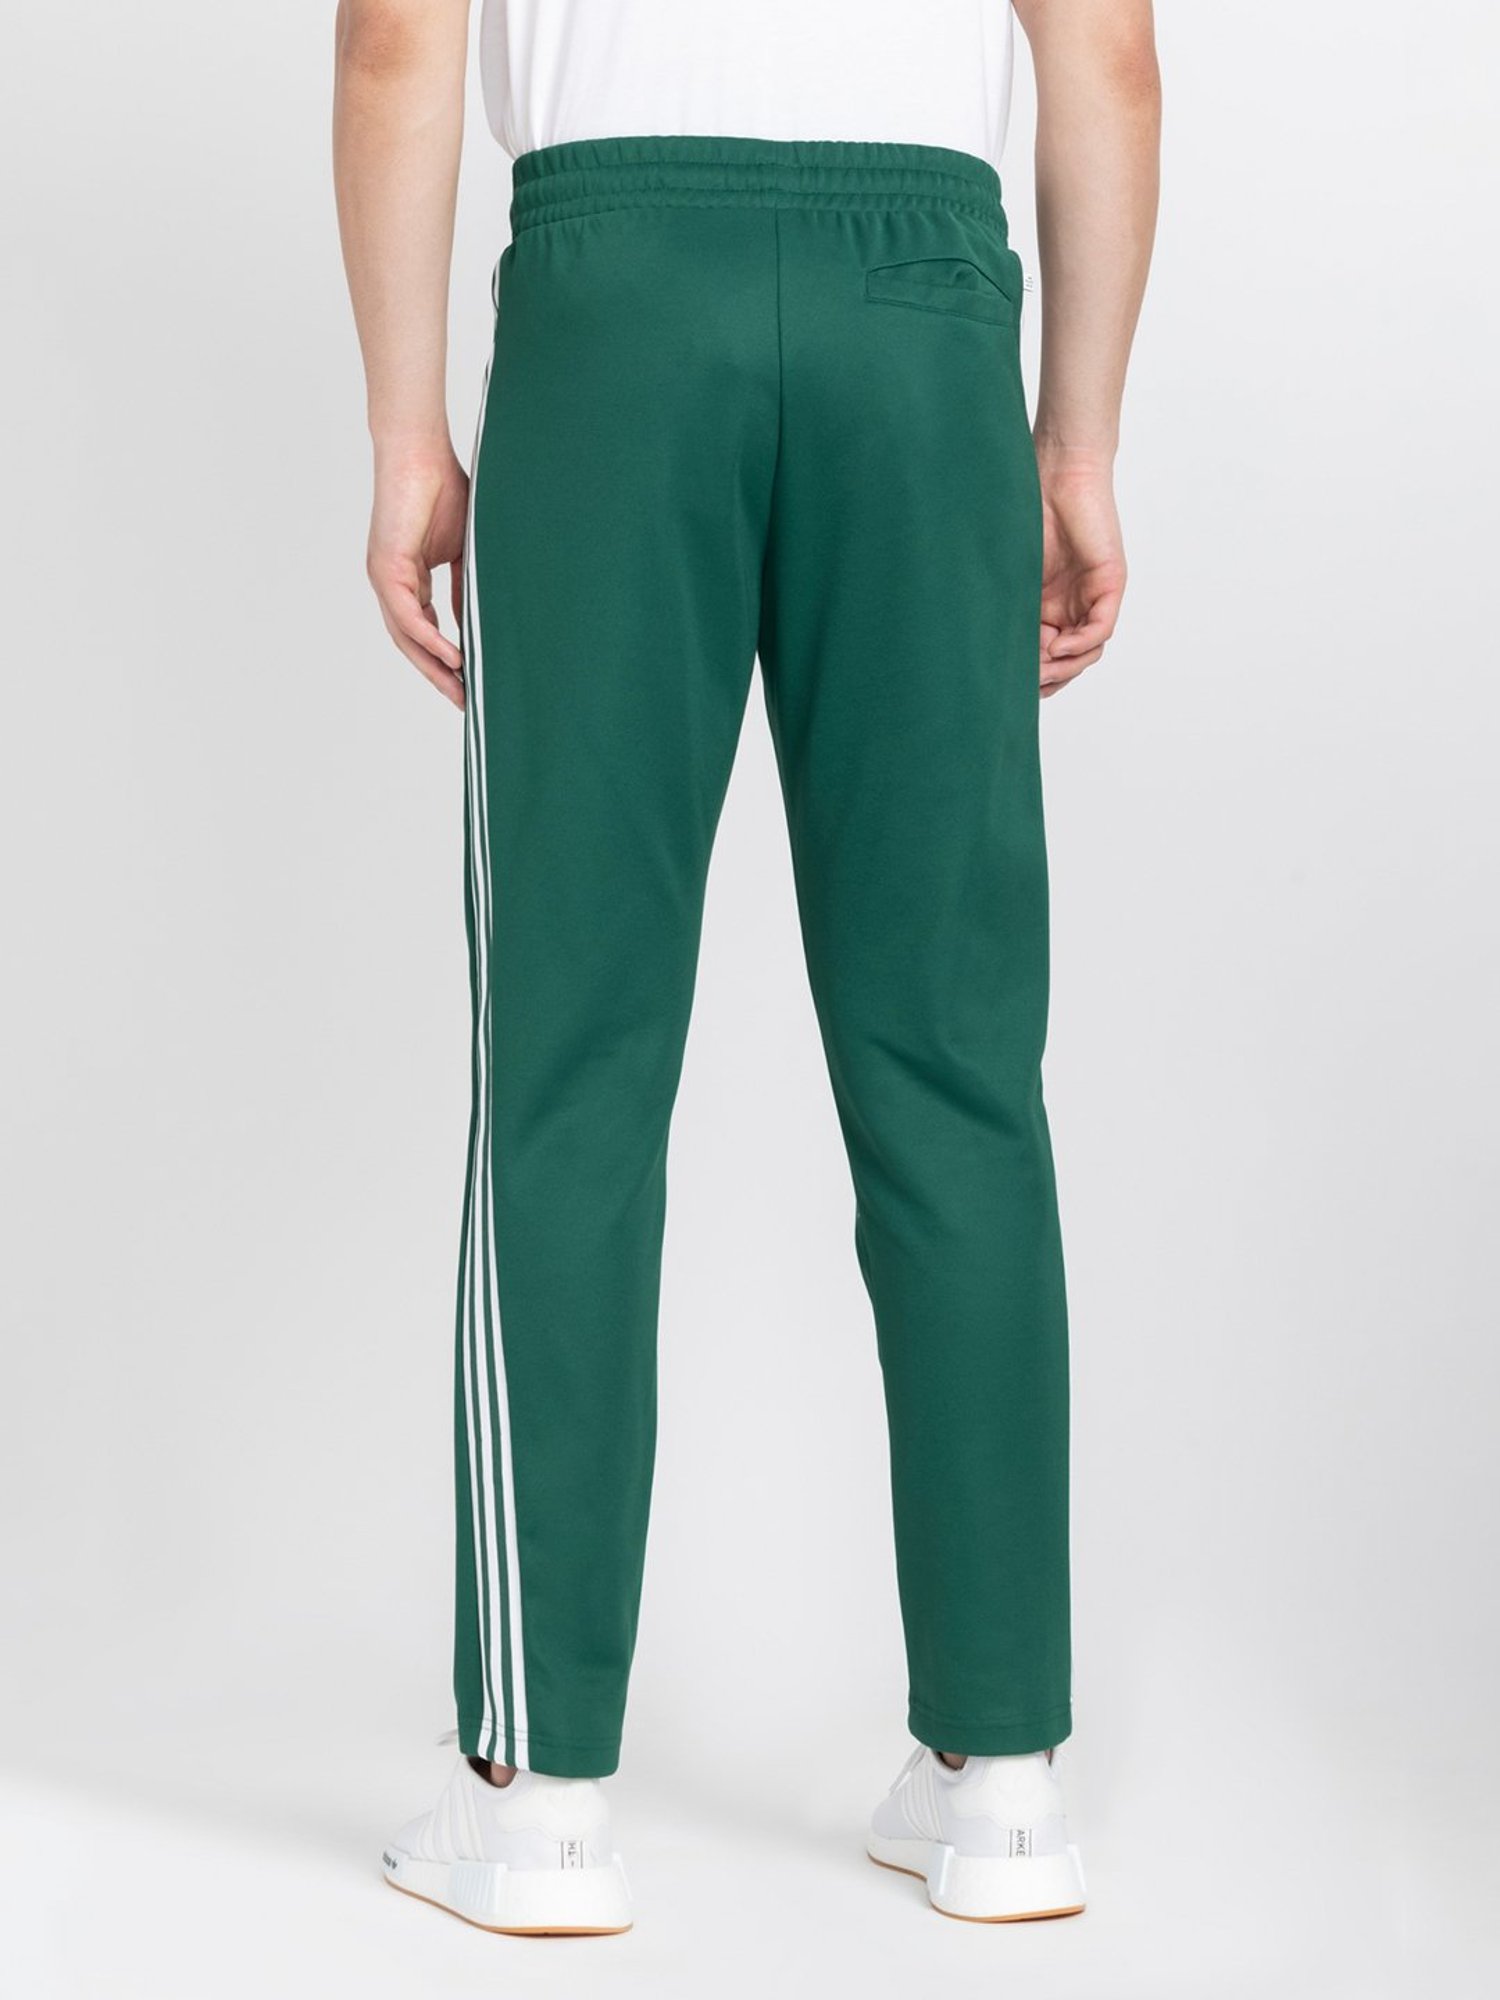 Buy ADIDAS Green Printed Cotton Regular Fit Men's Track Pants | Shoppers  Stop